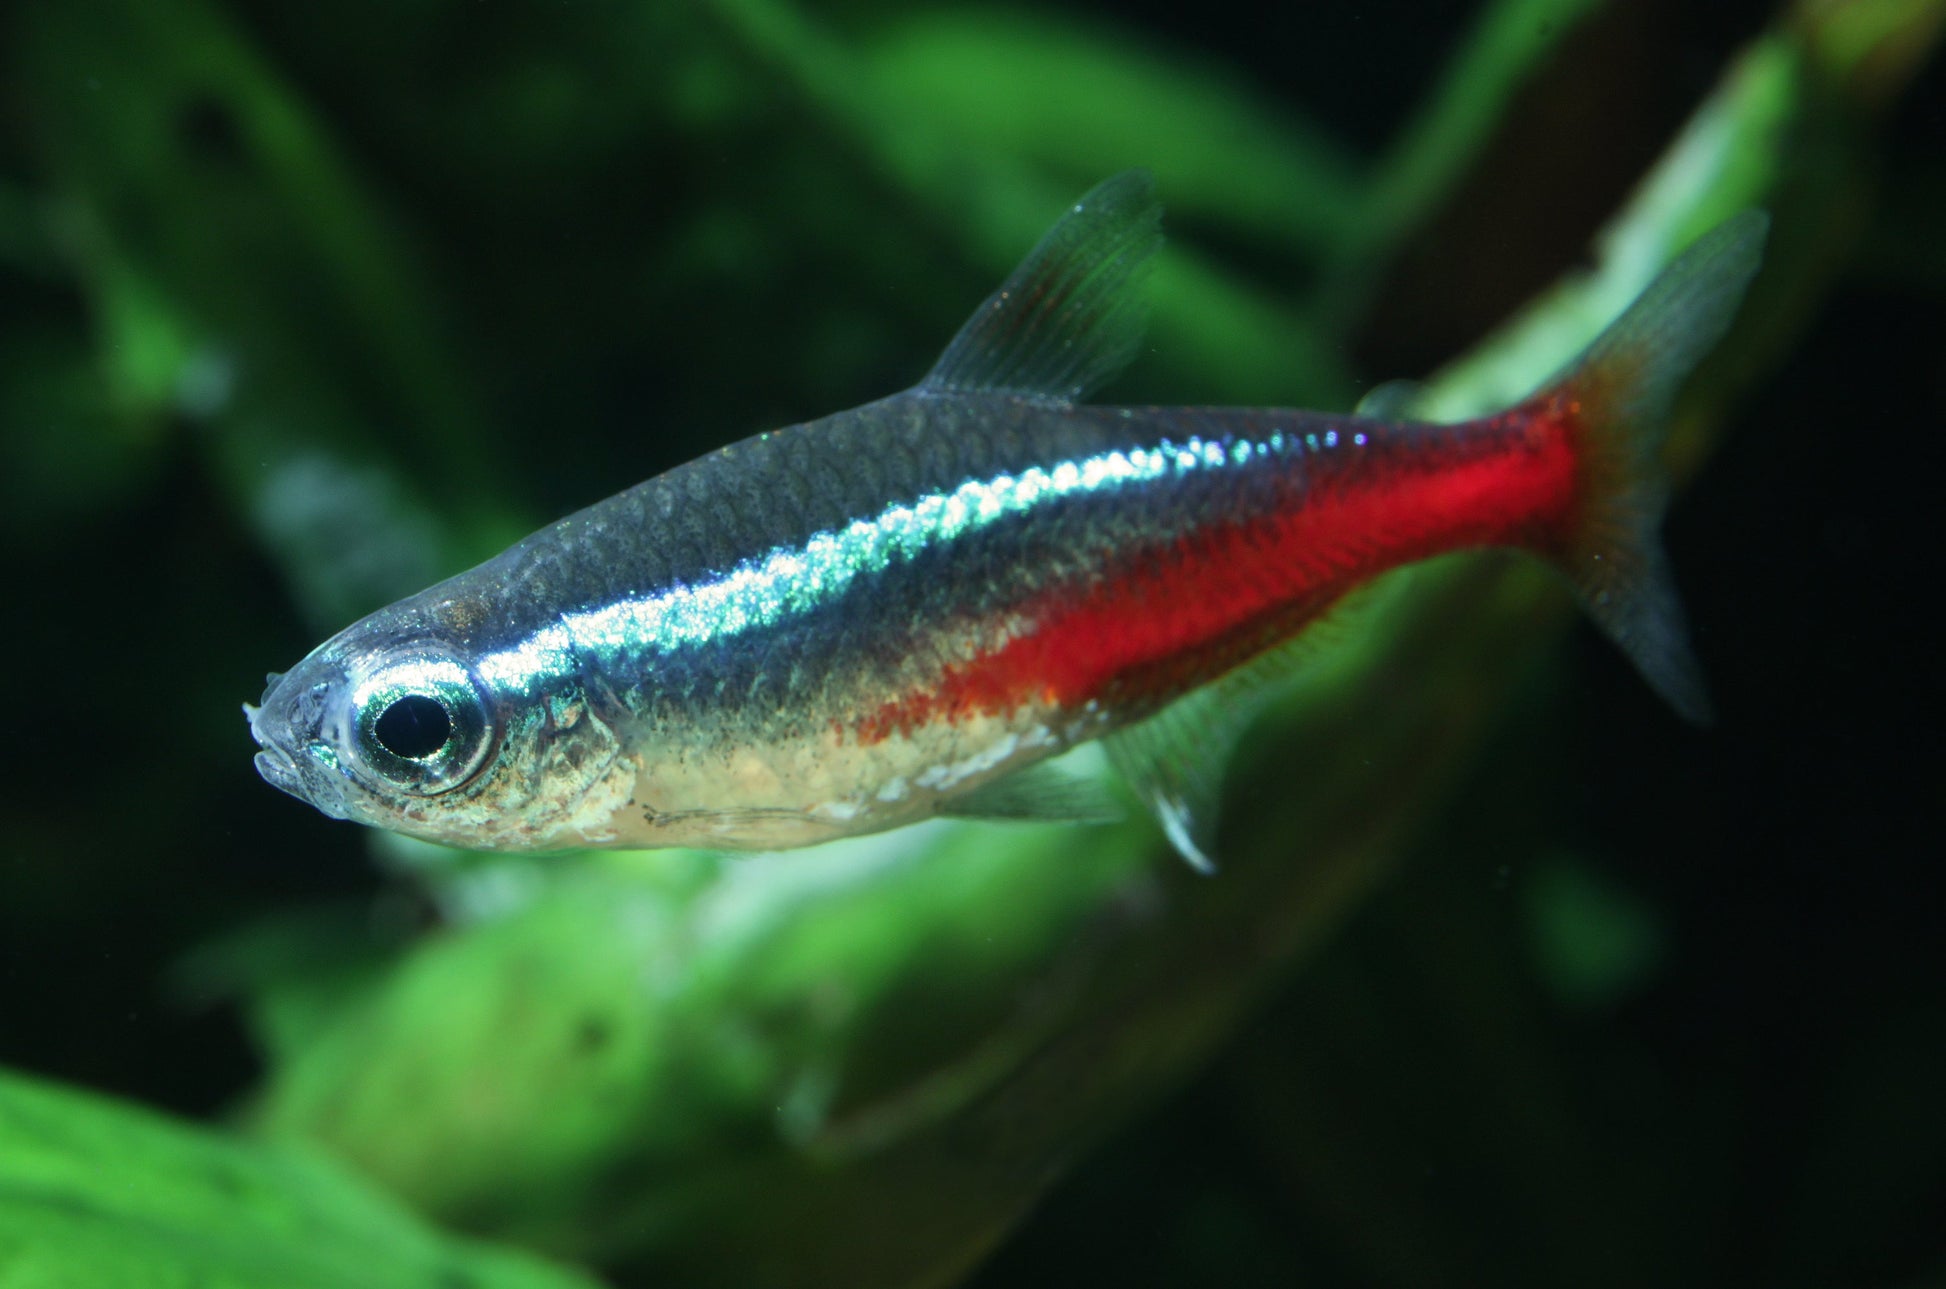    Picture of a Neon Tetra by Holger Krisp - Own work, CC BY 3.0, https://commons.wikimedia.org/w/index.php?curid=26431525